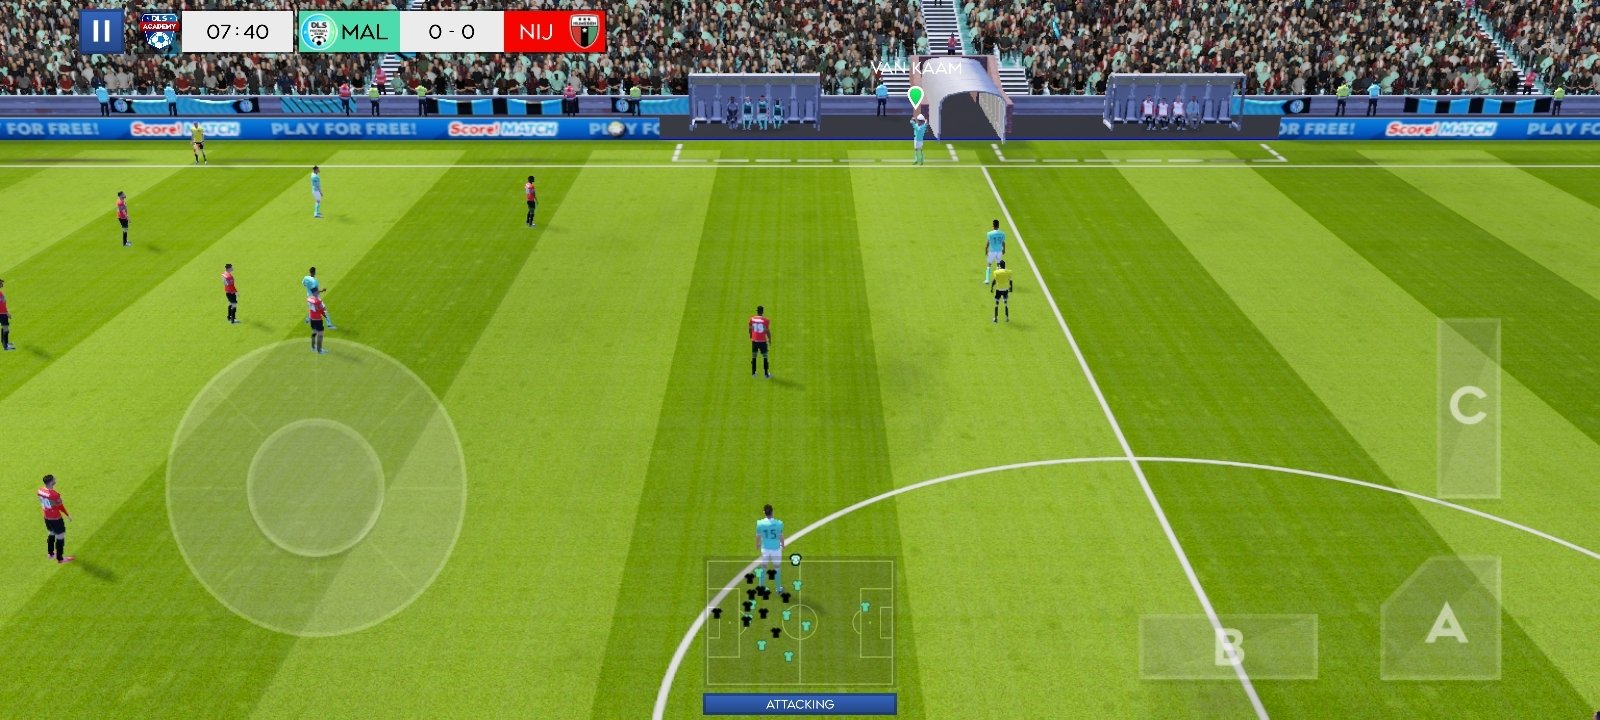 download the new for windows Soccer Football League 19